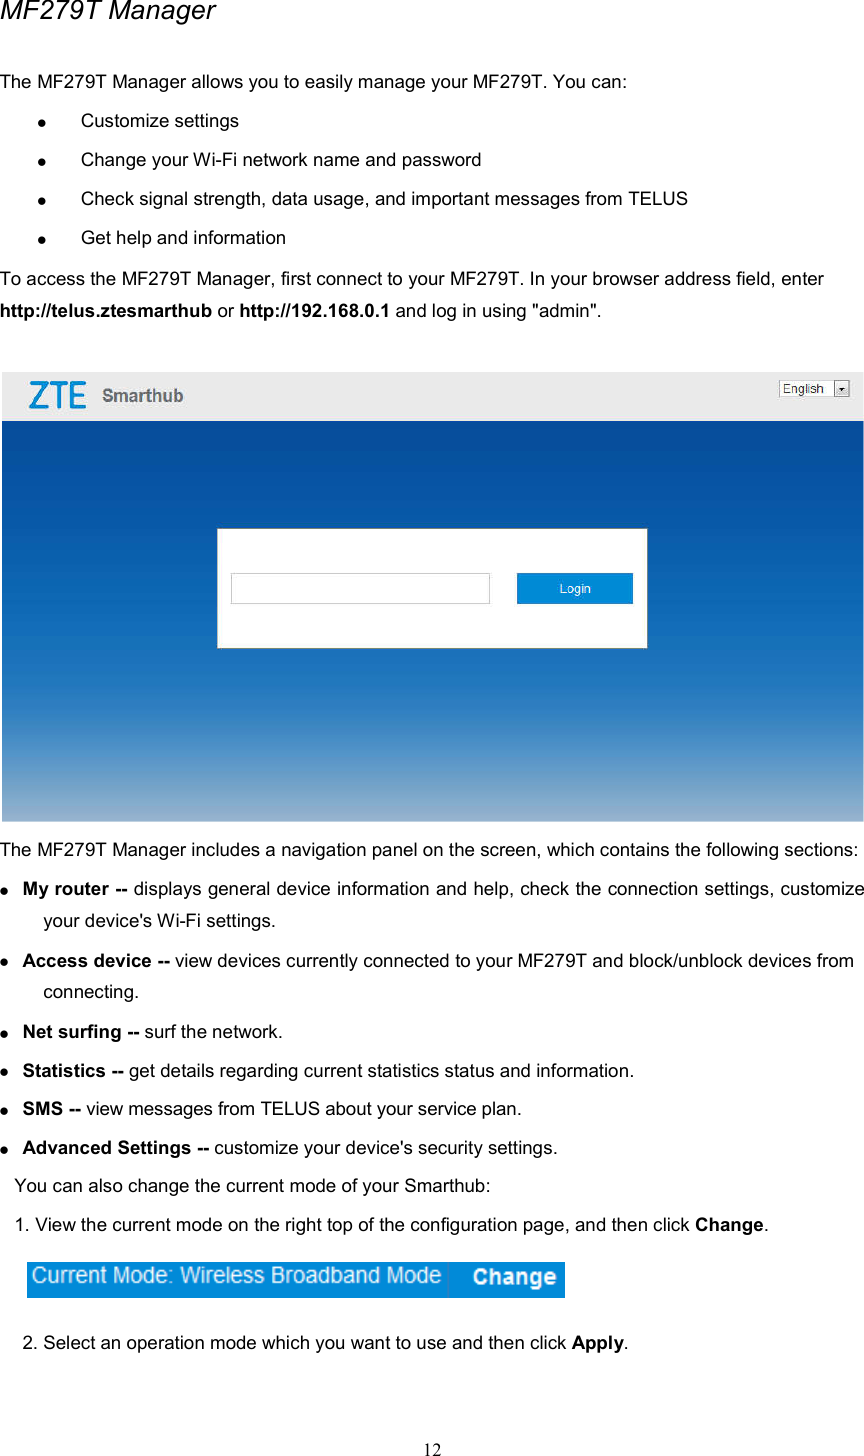 12  MF279T Manager The MF279T Manager allows you to easily manage your MF279T. You can:  Customize settings  Change your Wi-Fi network name and password  Check signal strength, data usage, and important messages from TELUS  Get help and information To access the MF279T Manager, first connect to your MF279T. In your browser address field, enter http://telus.ztesmarthub or http://192.168.0.1 and log in using &quot;admin&quot;.     The MF279T Manager includes a navigation panel on the screen, which contains the following sections:  My router -- displays general device information and help, check the connection settings, customize your device&apos;s Wi-Fi settings.  Access device -- view devices currently connected to your MF279T and block/unblock devices from connecting.  Net surfing -- surf the network.    Statistics -- get details regarding current statistics status and information.  SMS -- view messages from TELUS about your service plan.    Advanced Settings -- customize your device&apos;s security settings.   You can also change the current mode of your Smarthub: 1. View the current mode on the right top of the configuration page, and then click Change.                                            2. Select an operation mode which you want to use and then click Apply. 